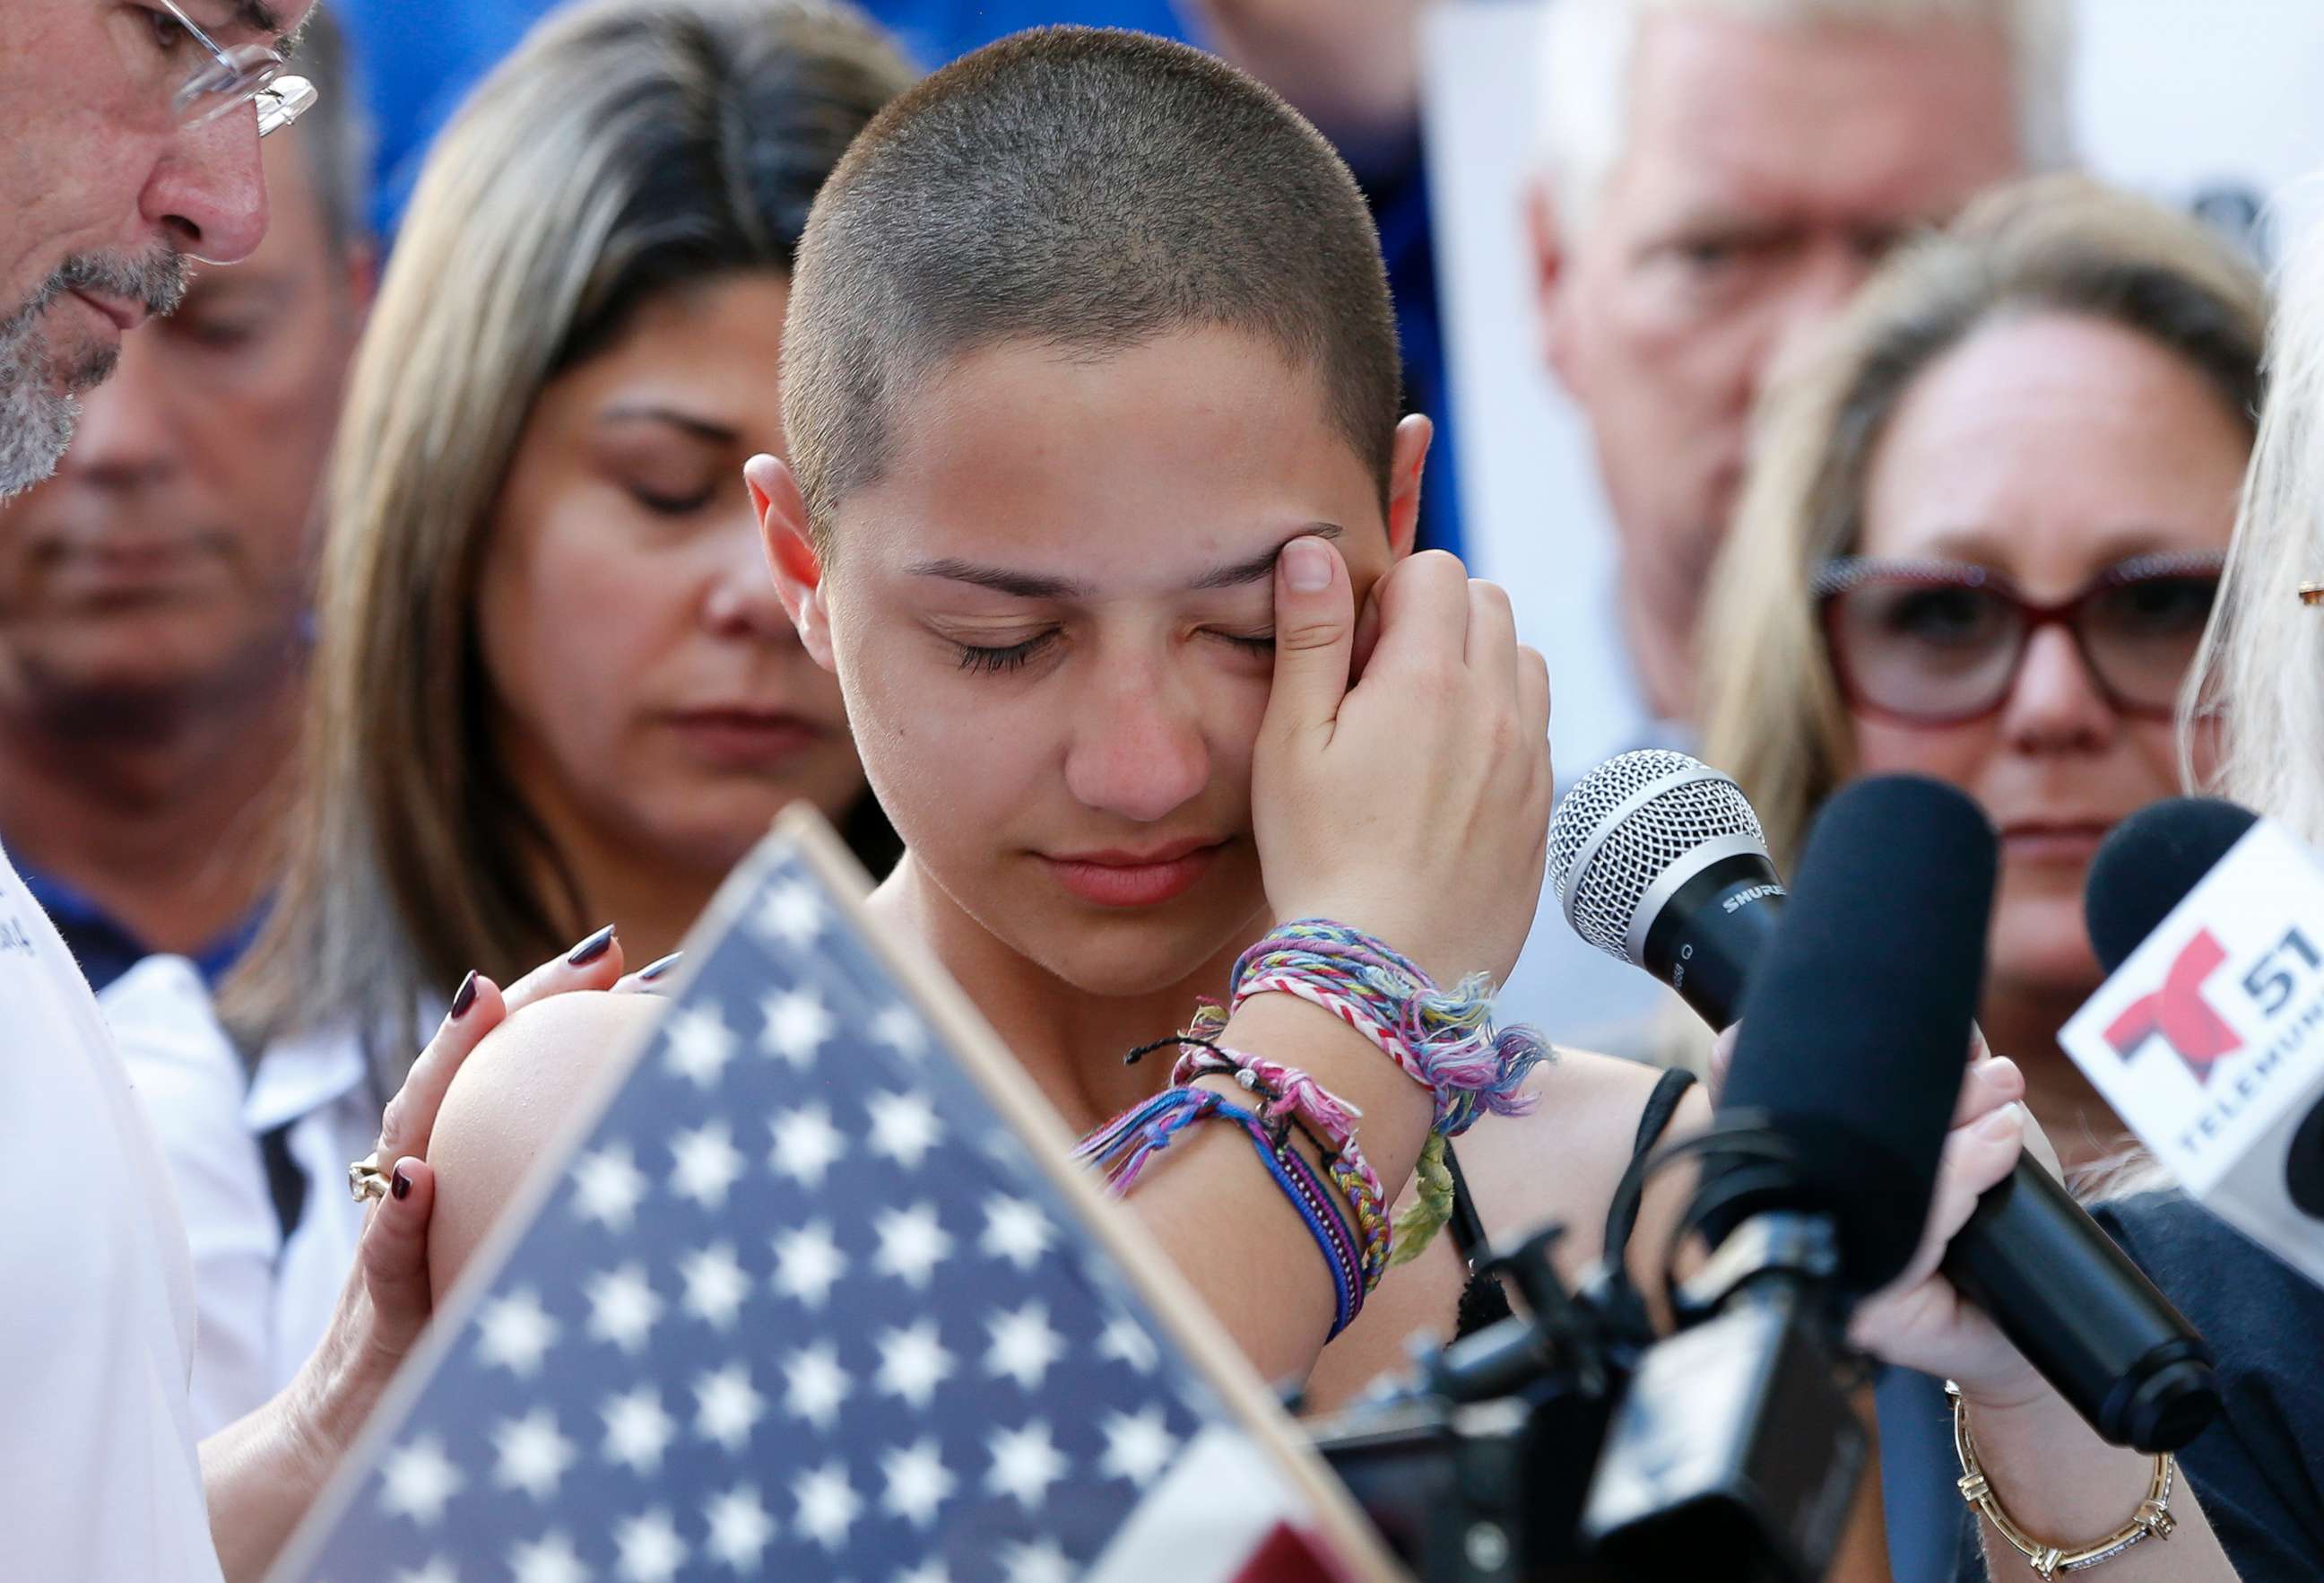 PHOTO: Marjory Stoneman Douglas High School student Emma Gonzalez speaks at a rally for gun control at the Broward County Federal Courthouse in Fort Lauderdale, Florida, Feb. 17, 2018.